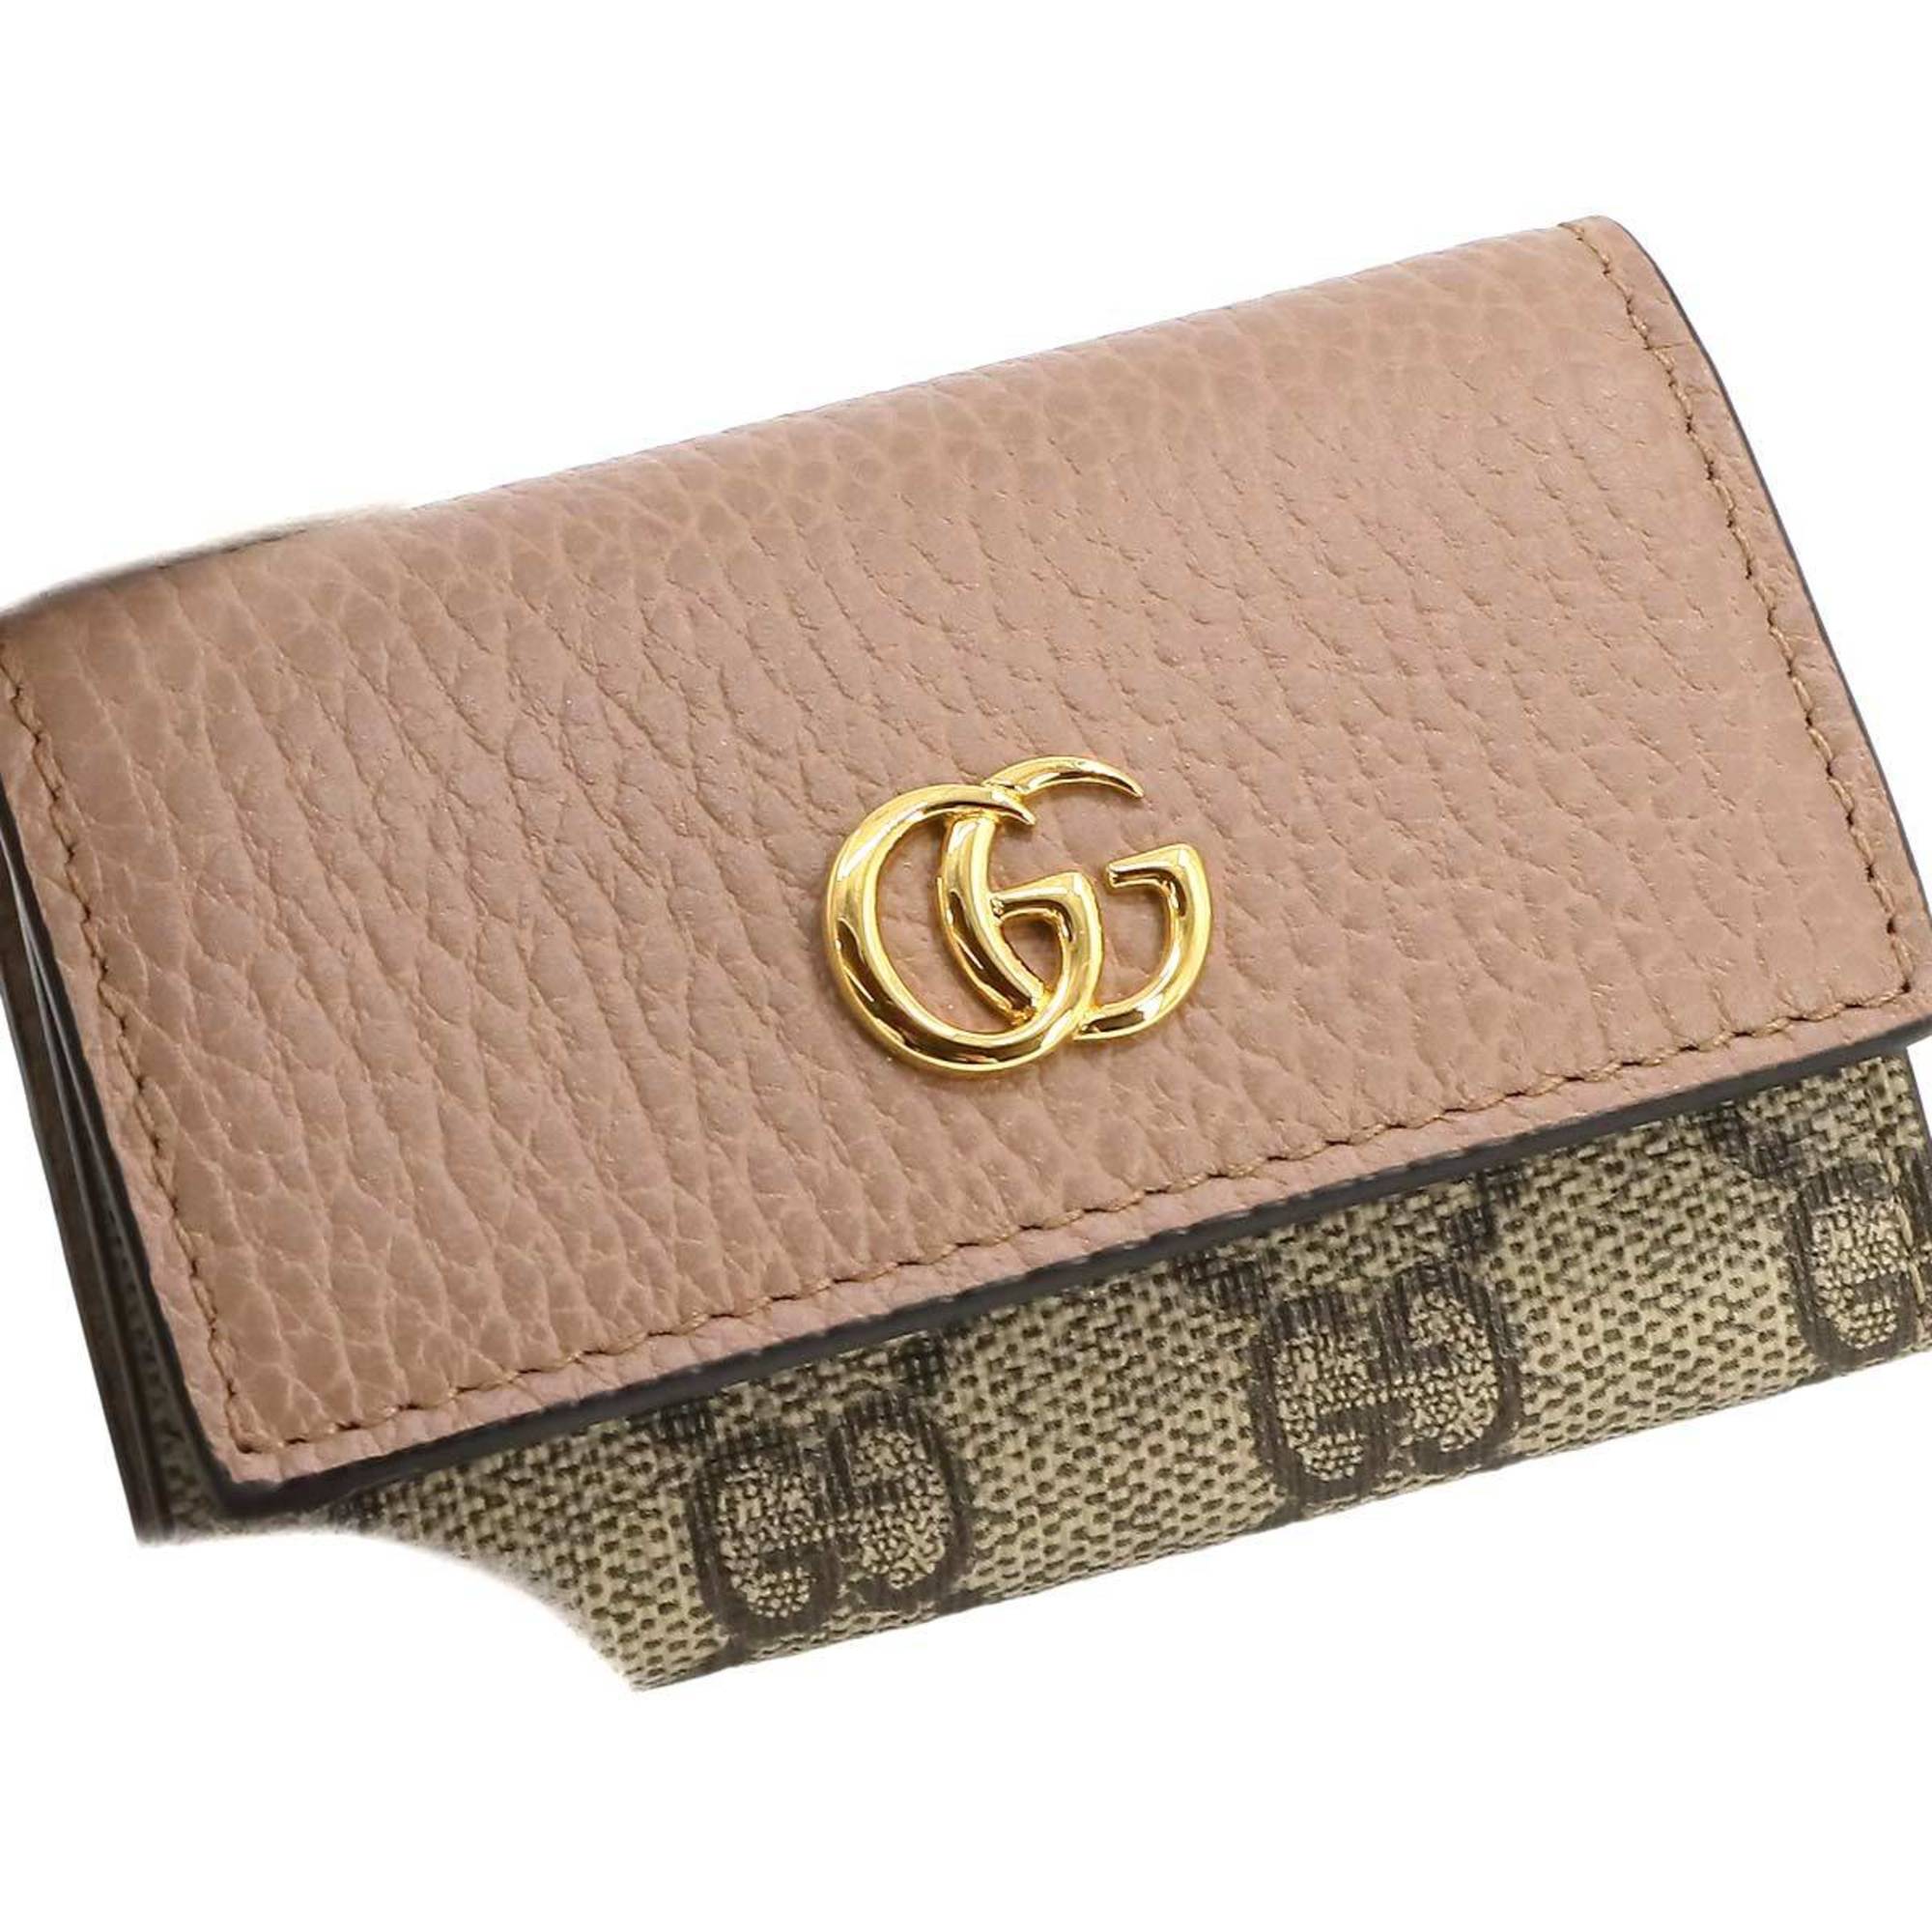 GUCCI GG Marmont Supreme 6-ring key case Leather Beige Brown 456118 Gold hardware Key Case